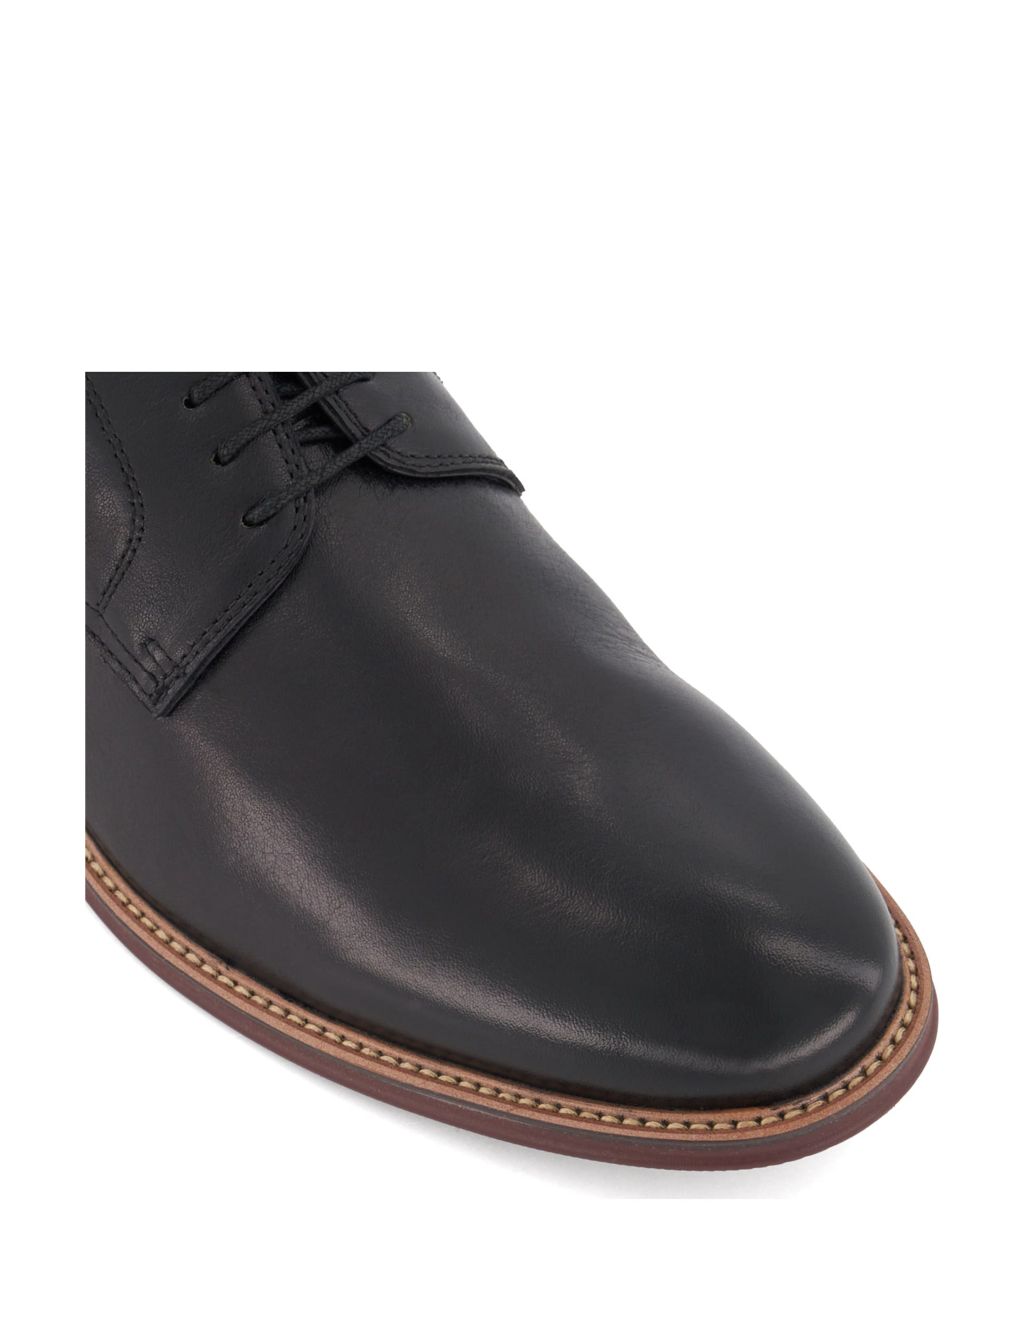 Leather Derby Shoes image 5